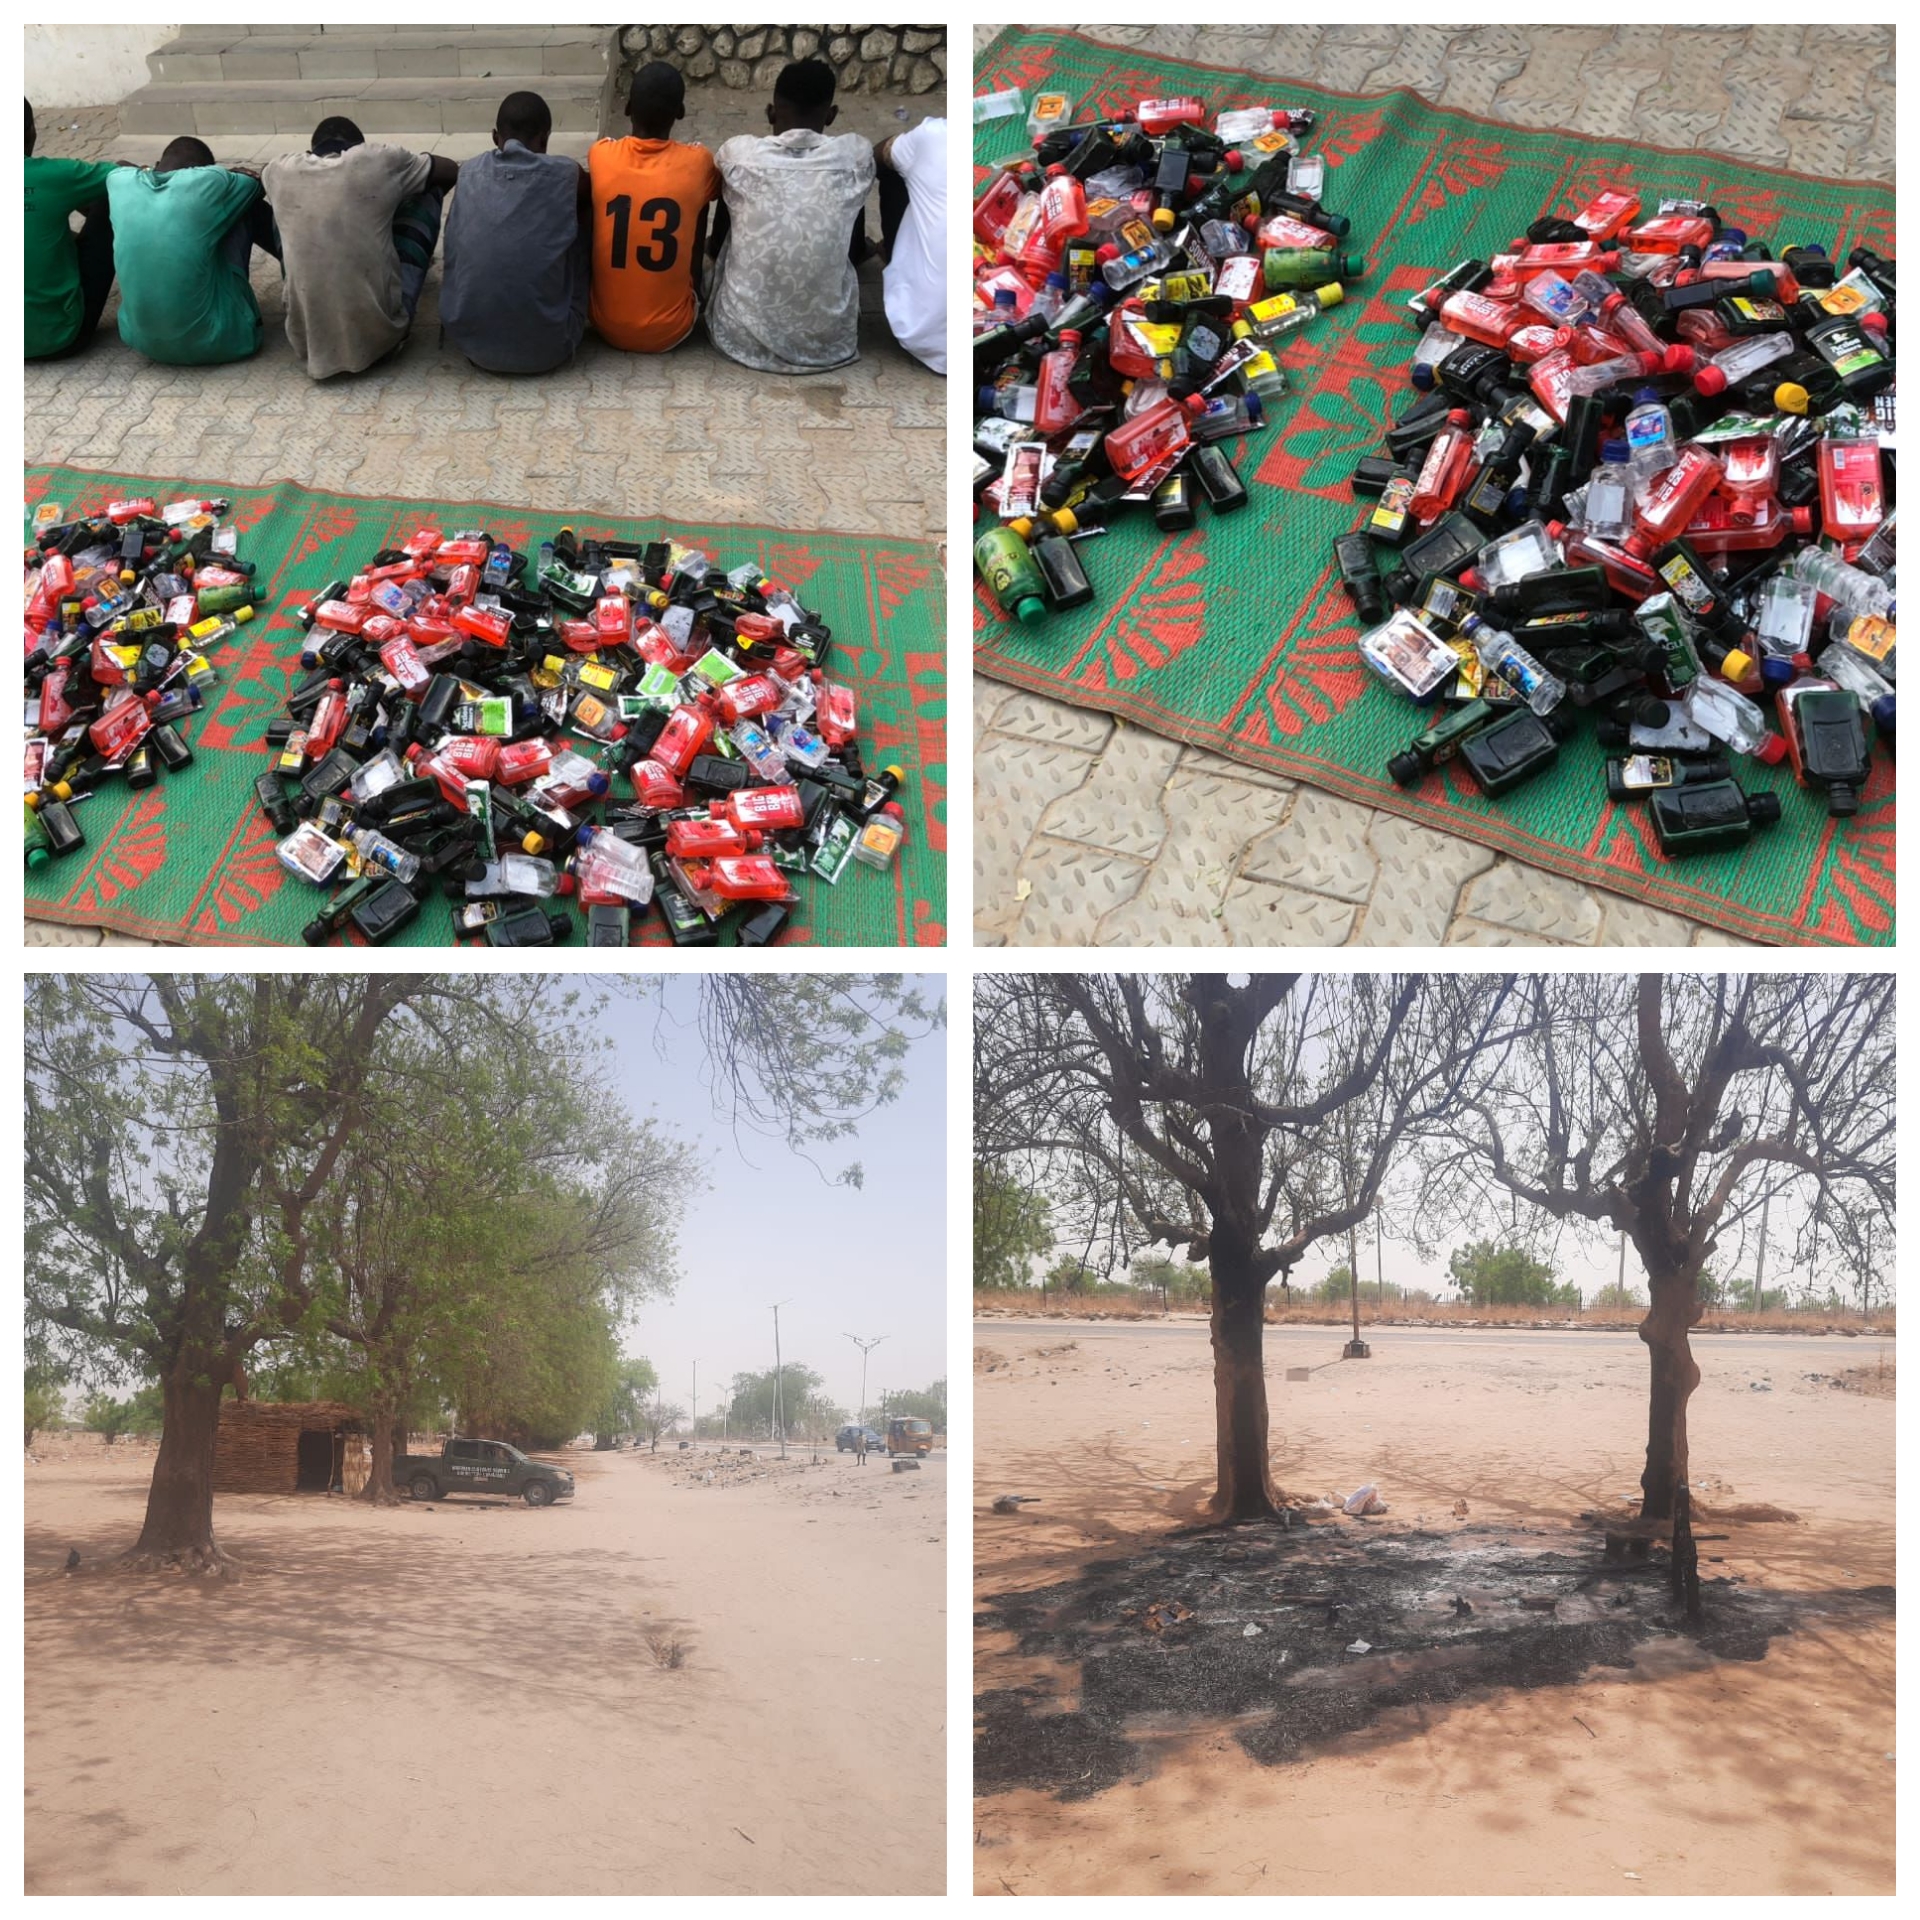 Repentant Boko Haram members attack police station, NDLEA and Customs checkpoints in Borno